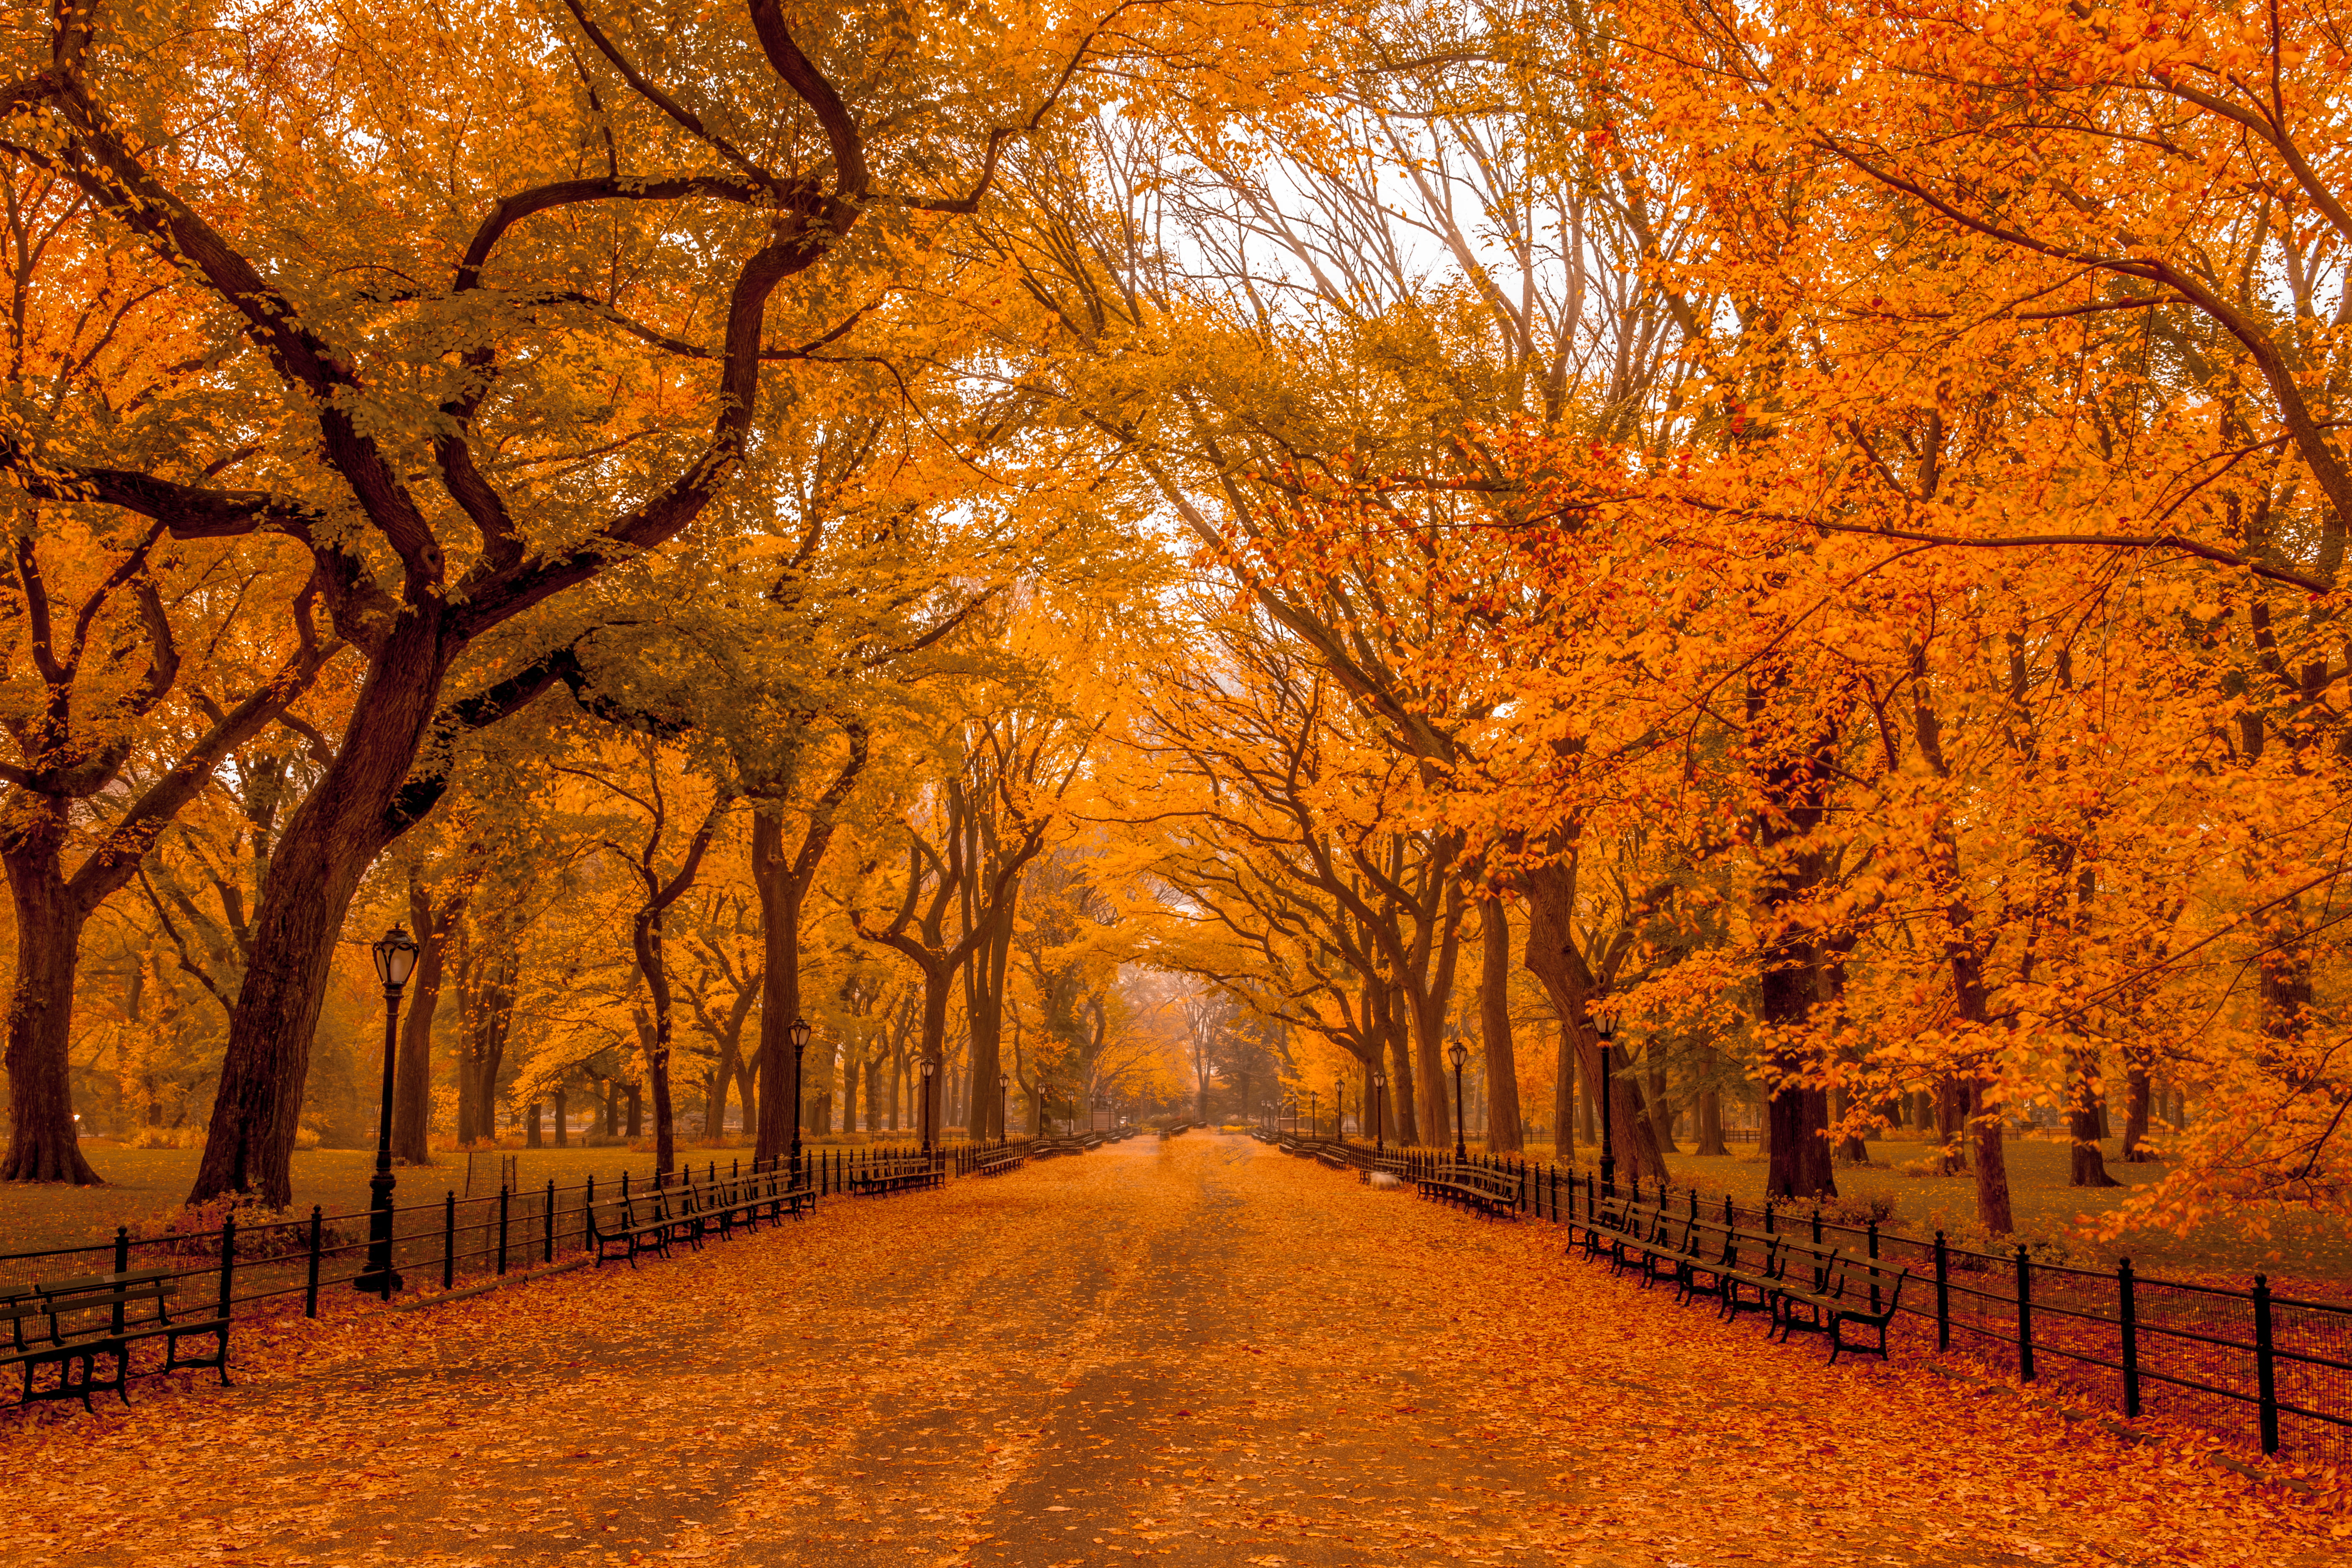 concrete road filled with dried leaves surrounded by trees, central park